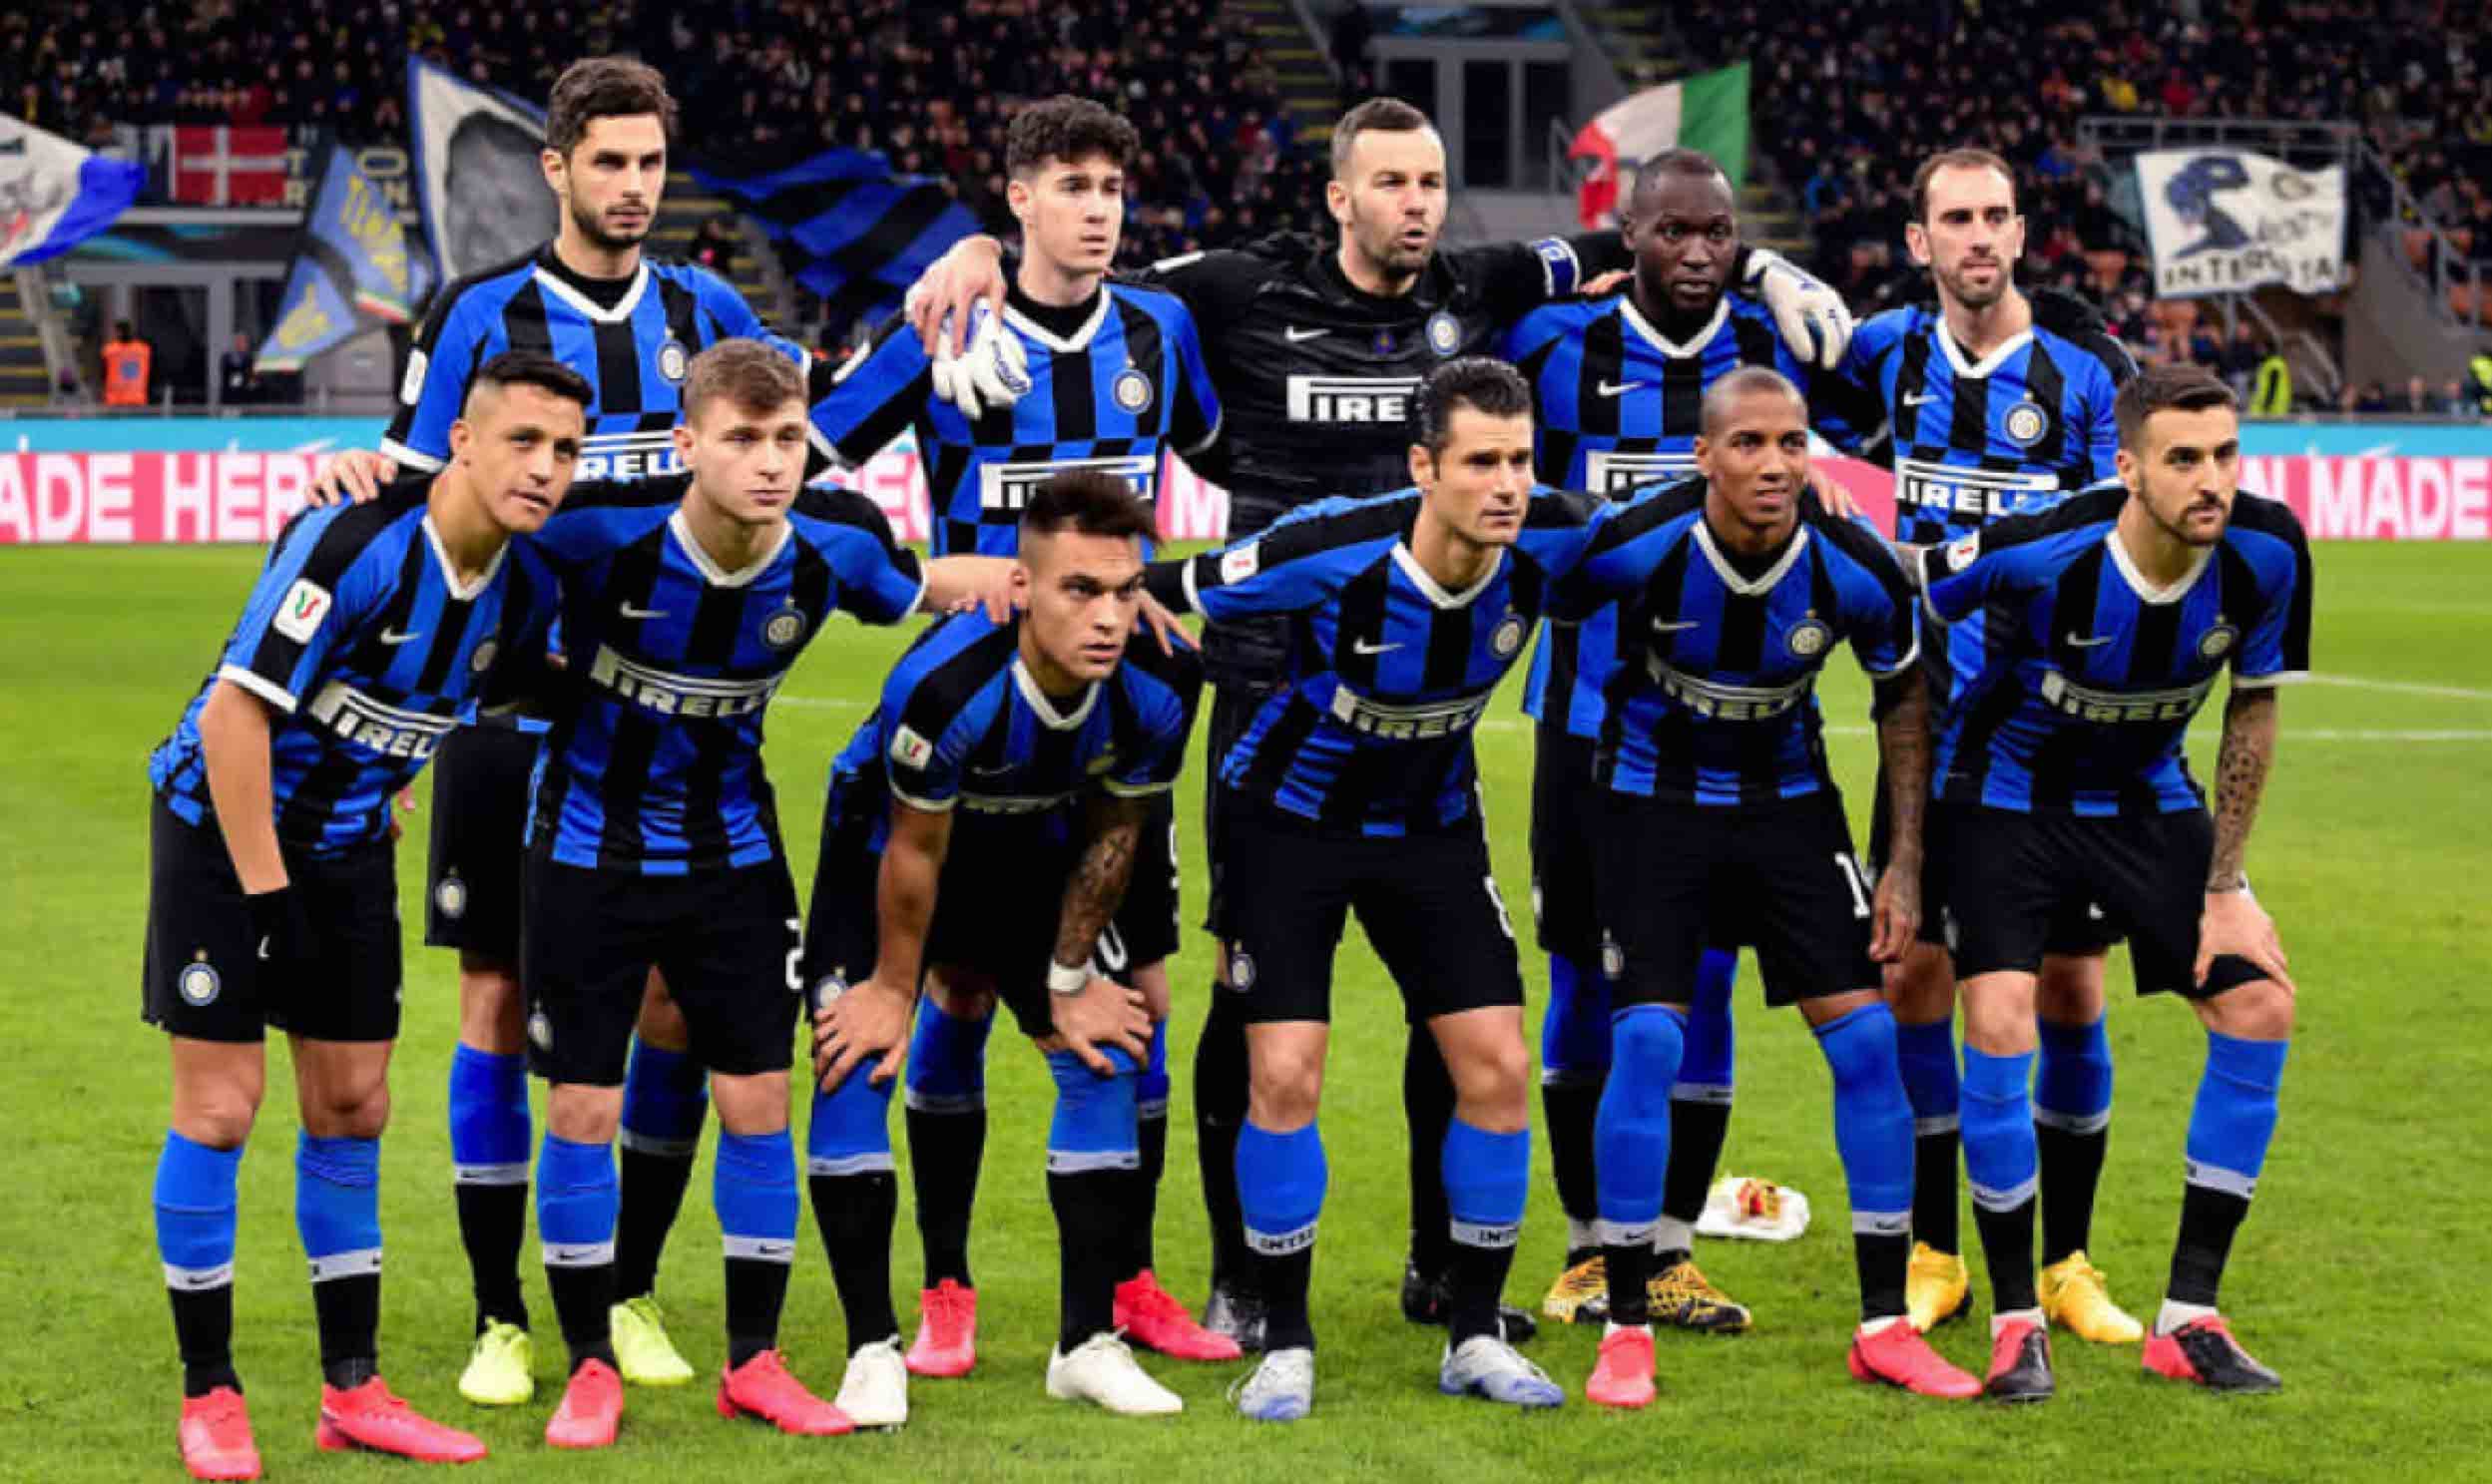 Inter Milan to change their club name and crest as part of anniversary celebrations